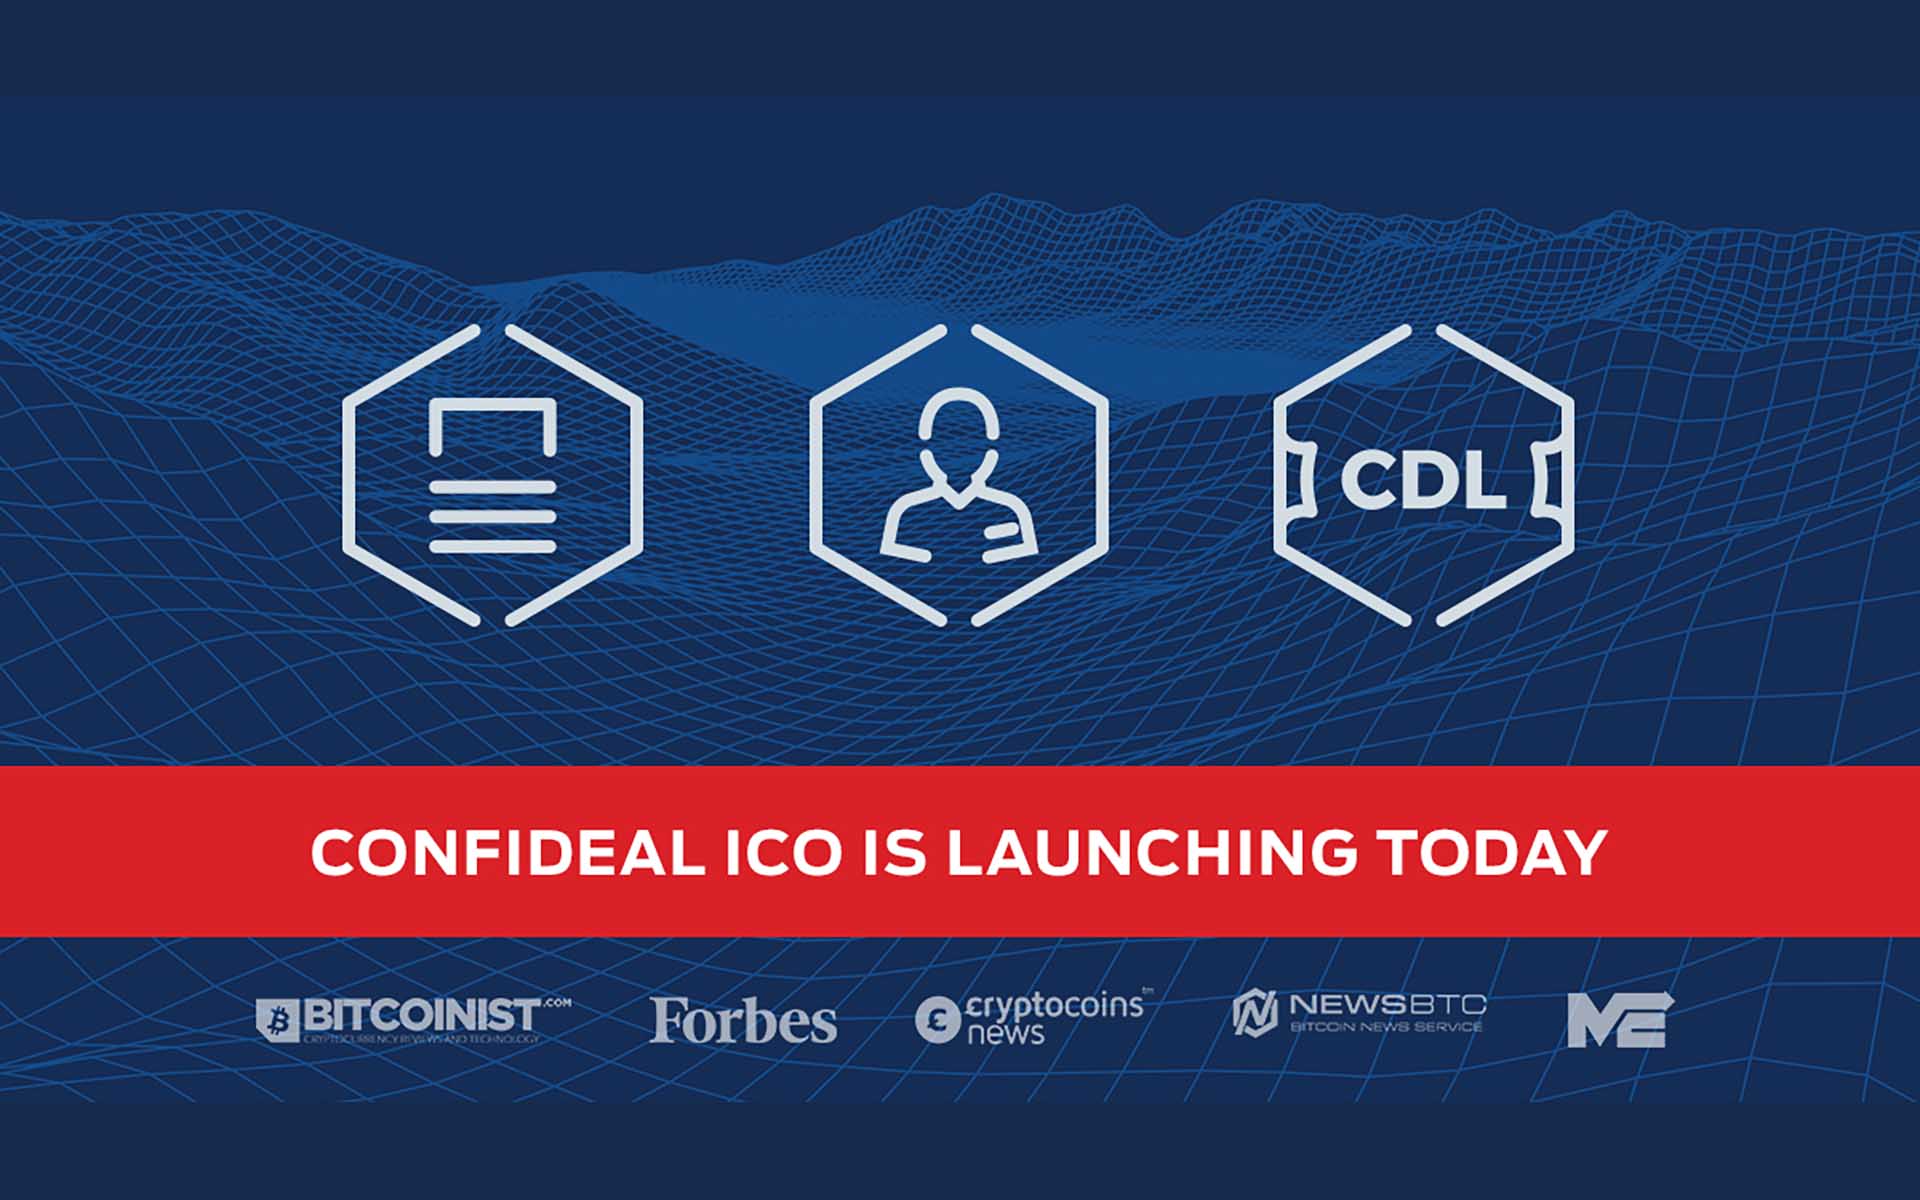 The Confideal ICO Has Started - Time to Contribute to Success!